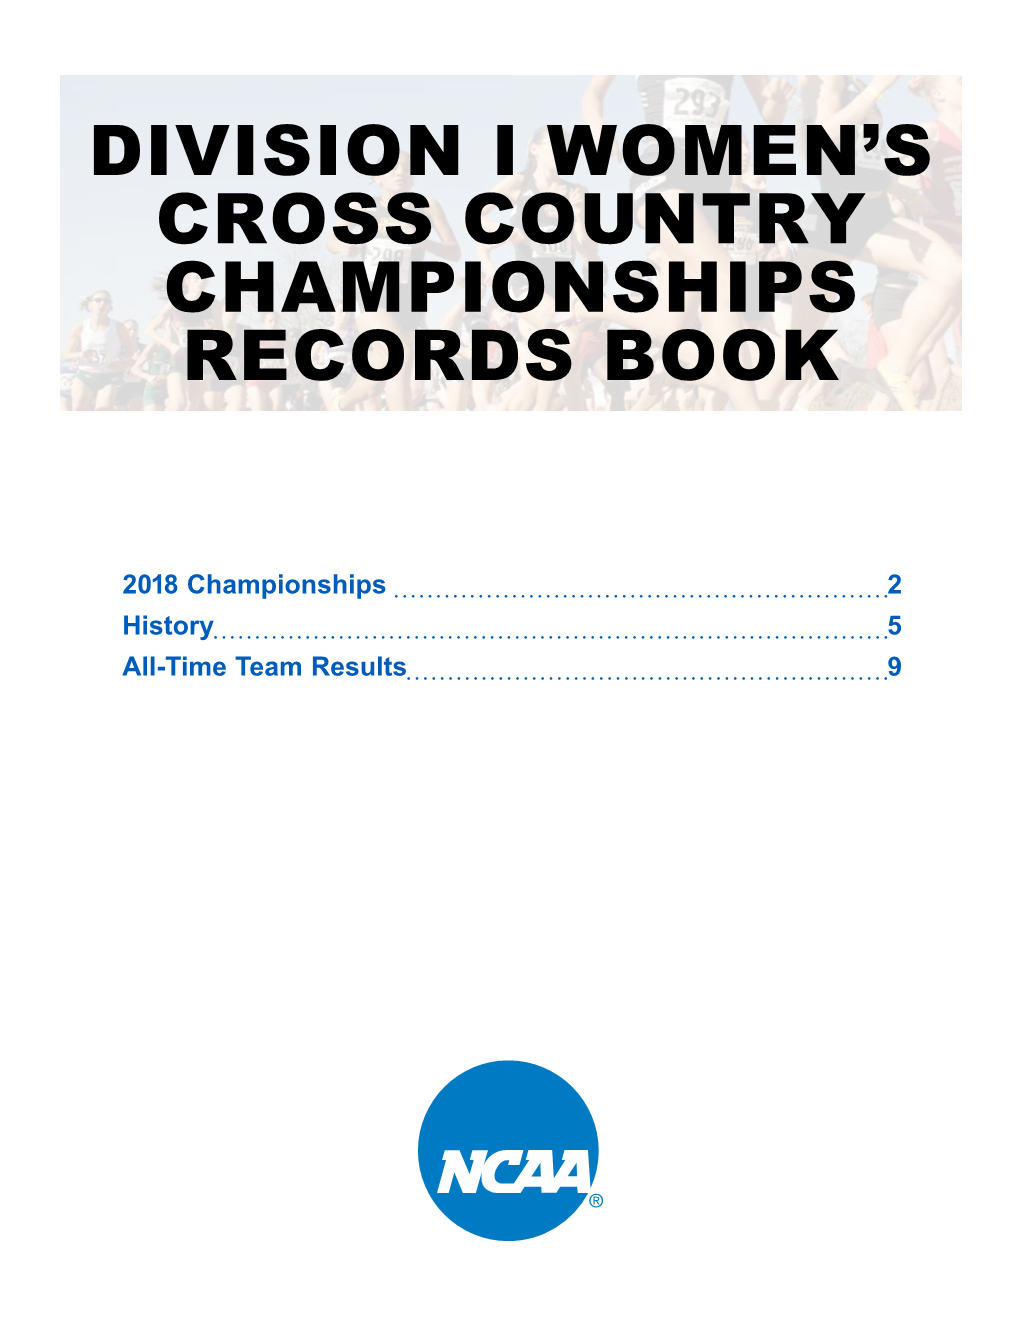 Division I Women's Cross Country Championships